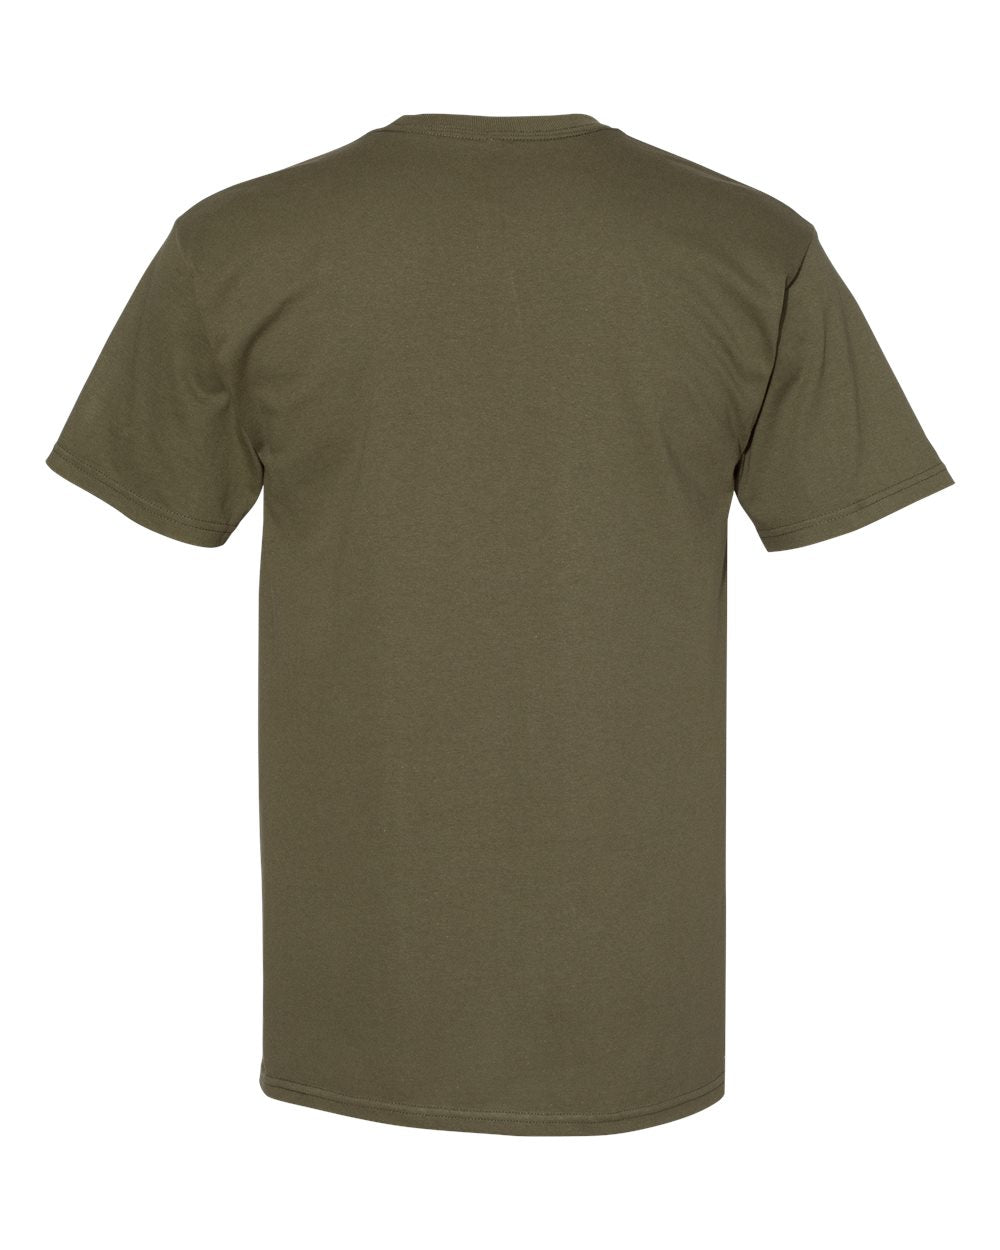 American Apparel Midweight Cotton Unisex Tee 1701 #color_Military Green